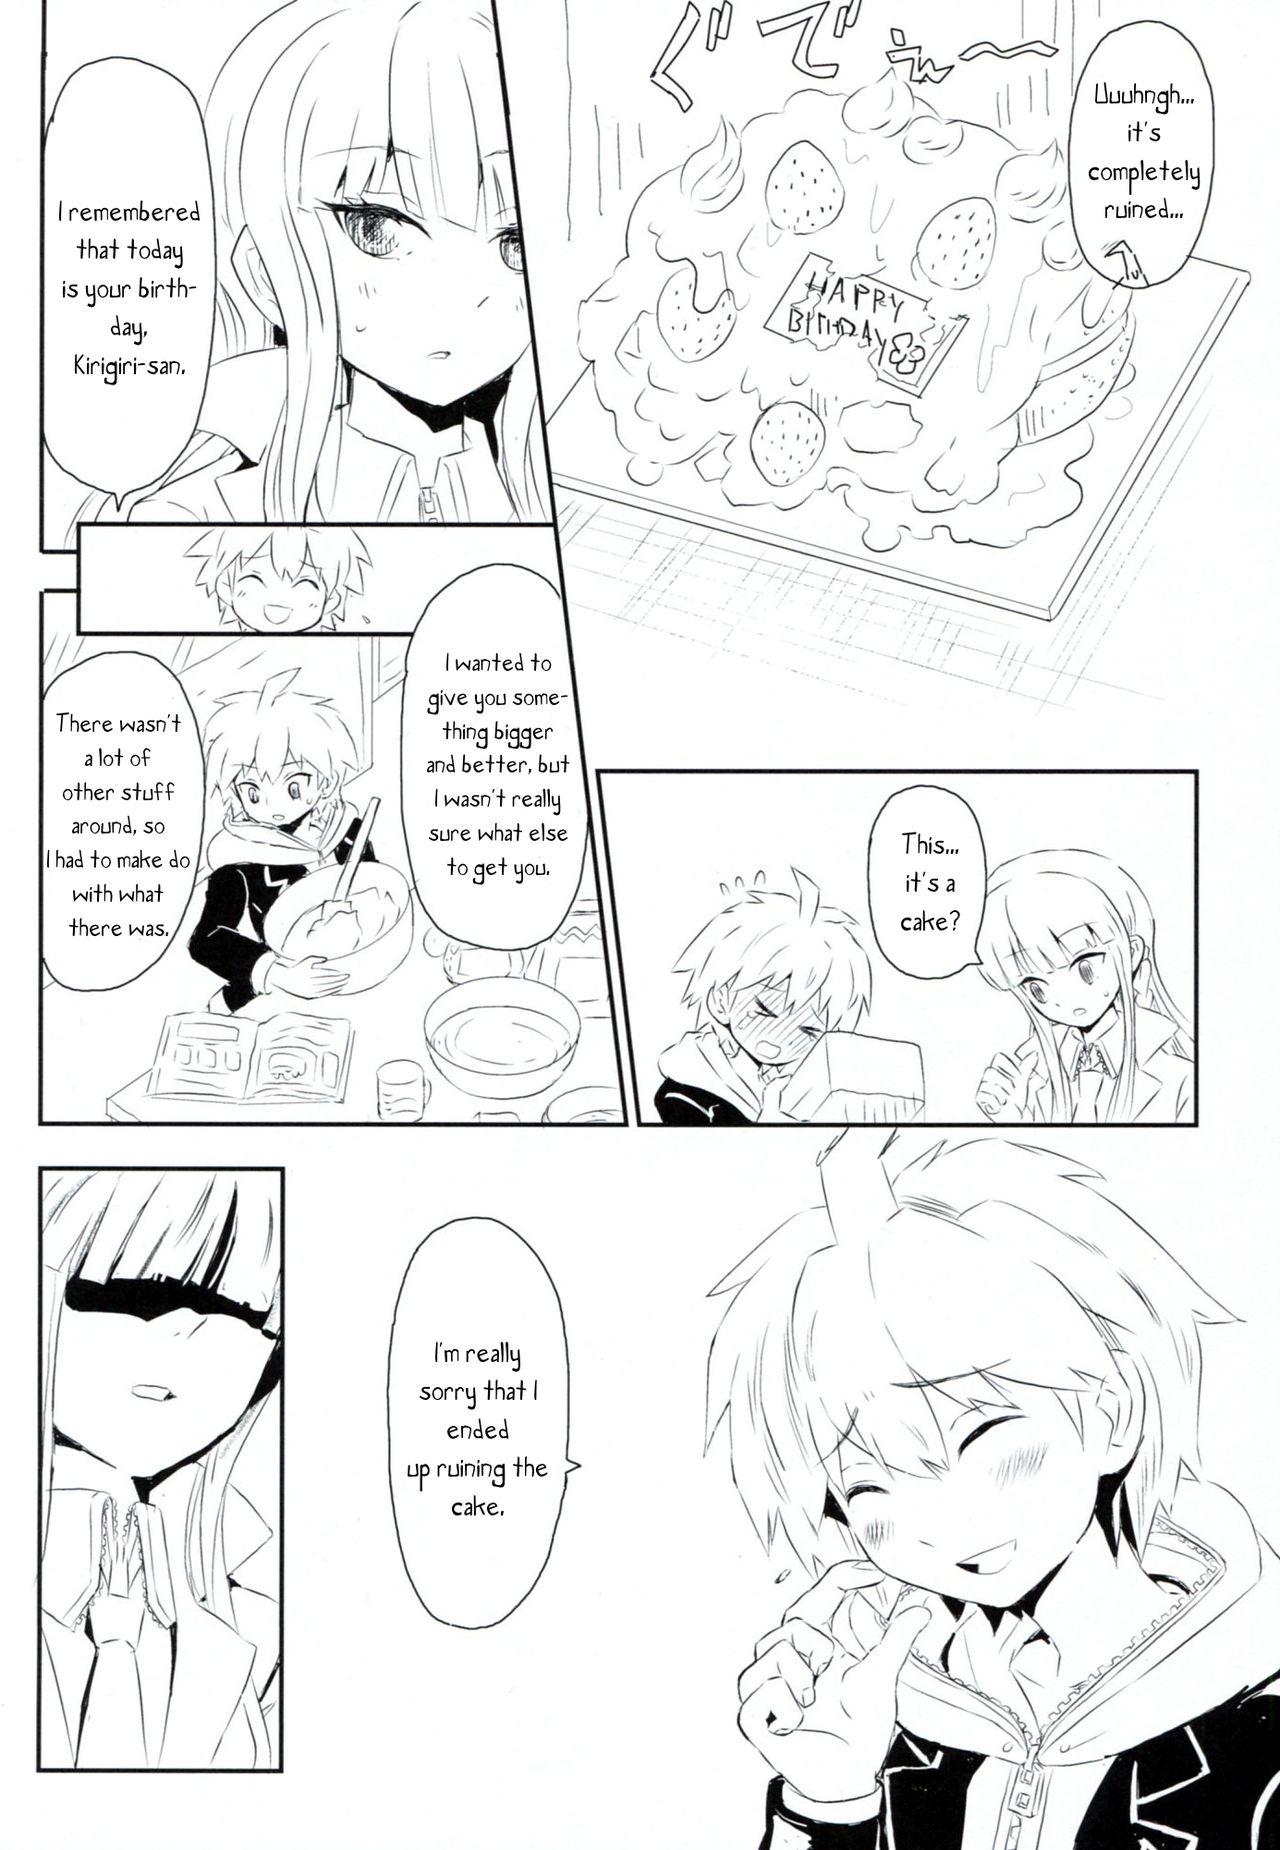 Home HAPPY BIRTHDAY PROMISE - Danganronpa Shemale - Page 7